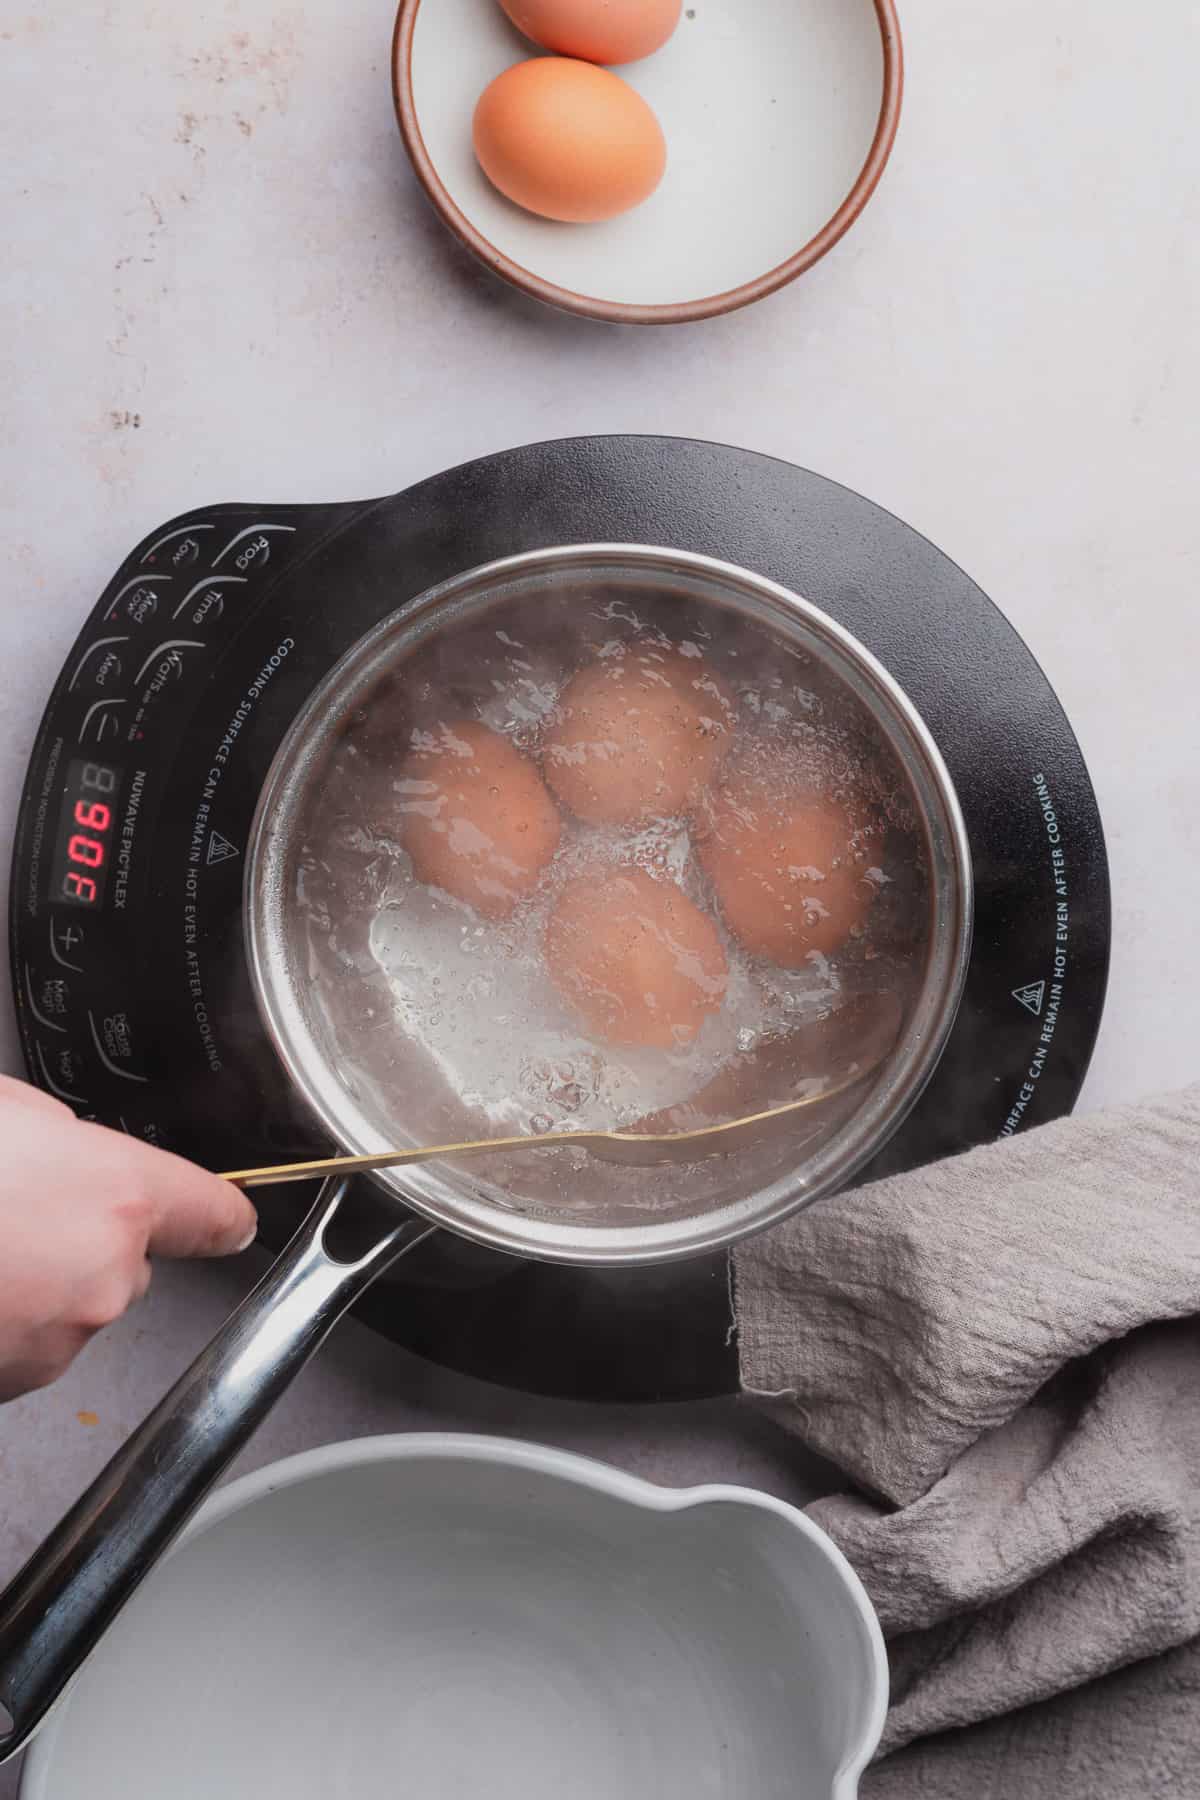 remove brown eggs from hot water in a saucepan with a slotted spoon